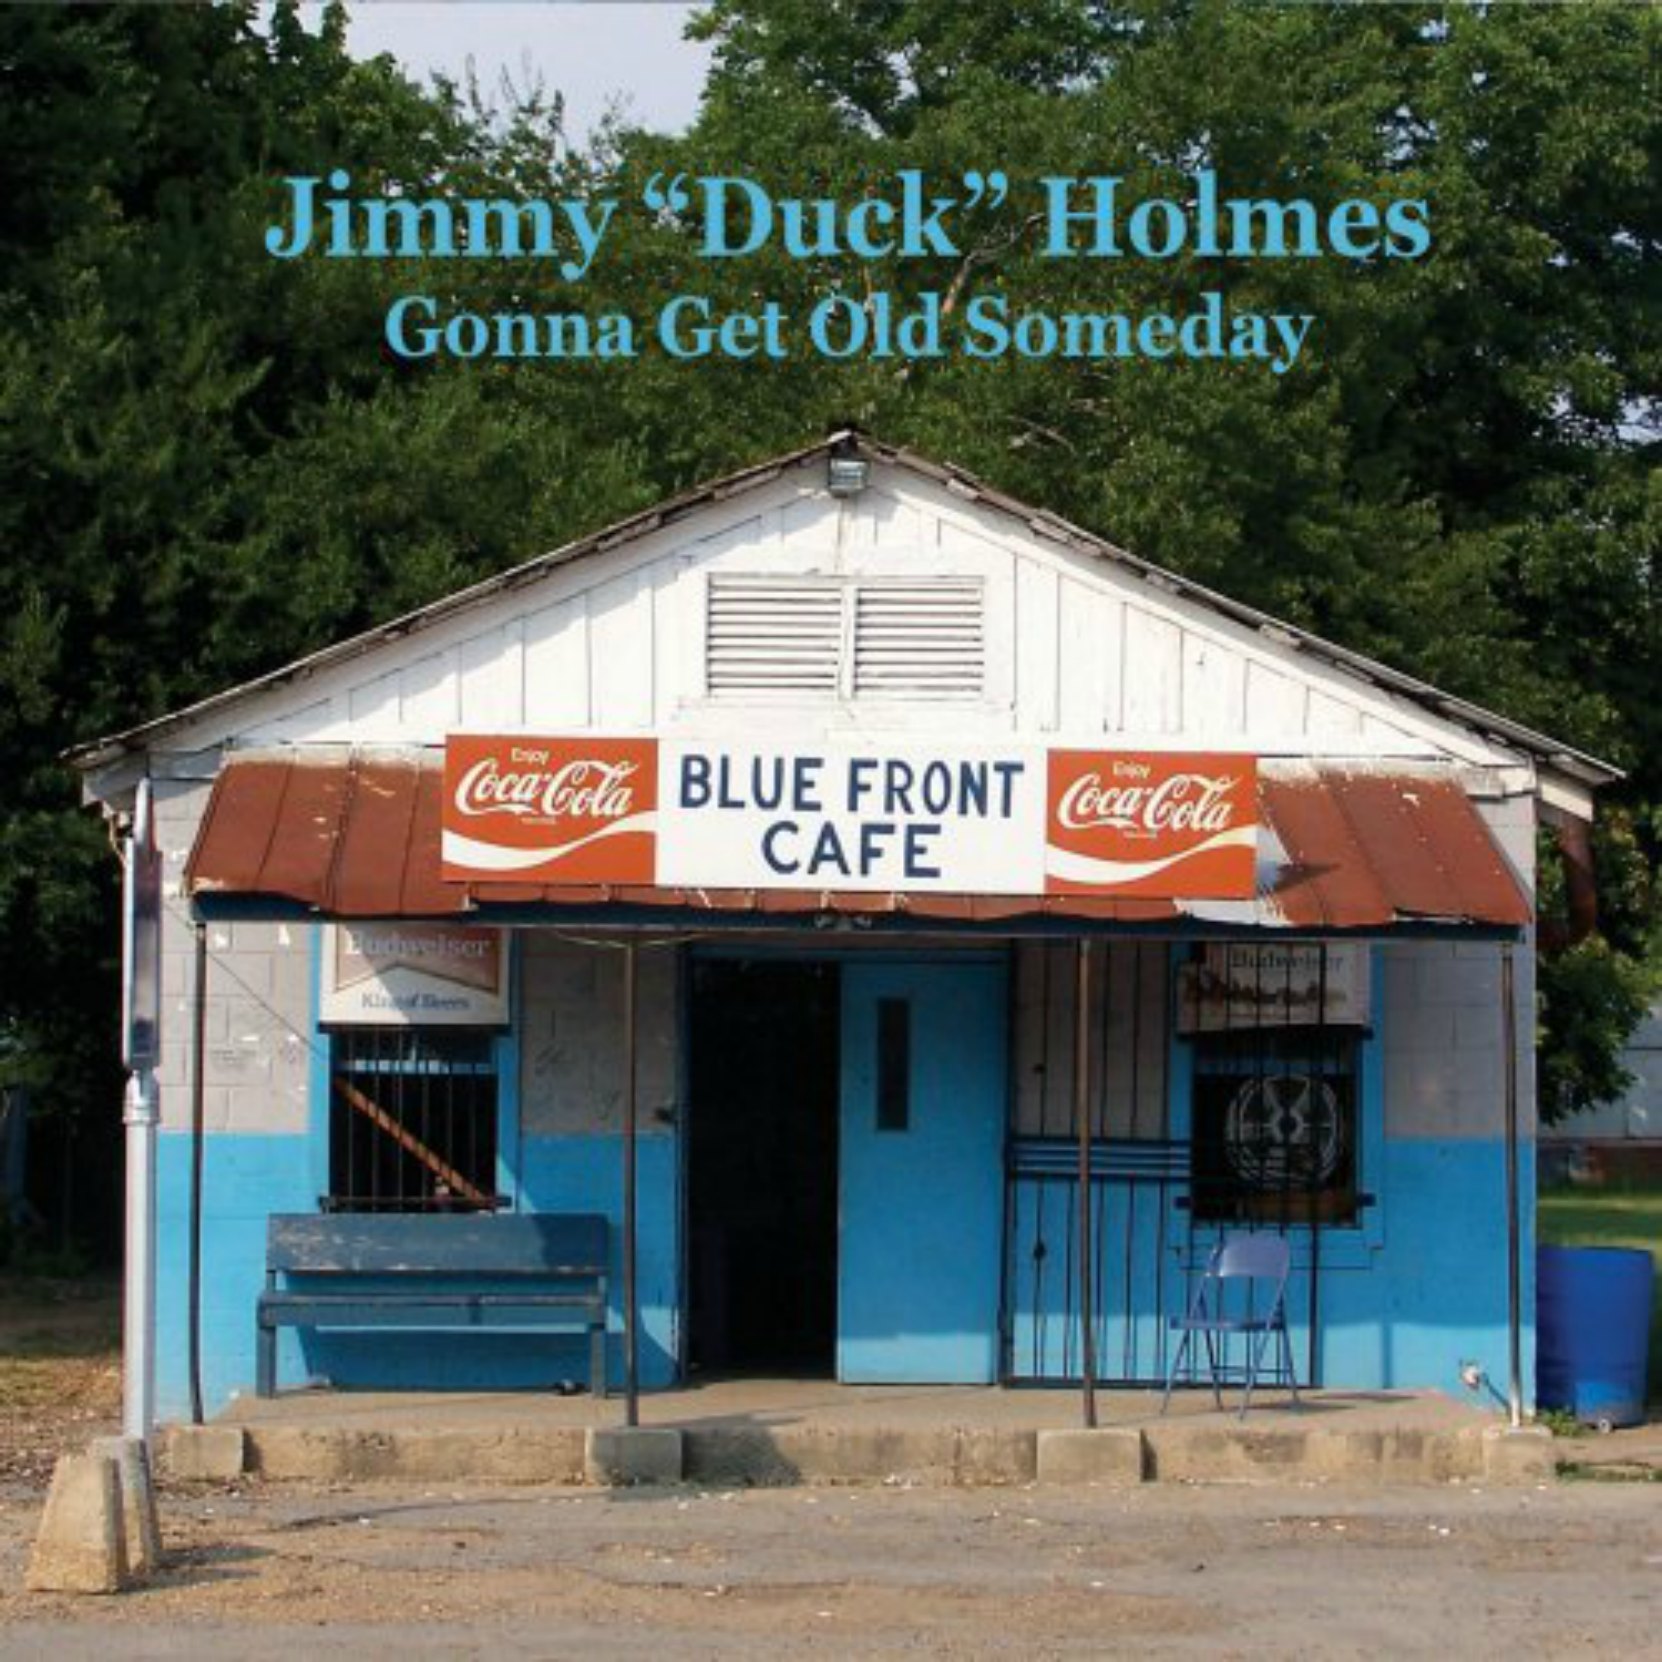 CD cover, Gonna Get Old Someday, by Jimmy "Duck" Holmes, released on Fat Possum Records. The cover photo is the Blue Front Cafe in Bentonia, Mississippi, which Jimmy Holmes owns and operates.